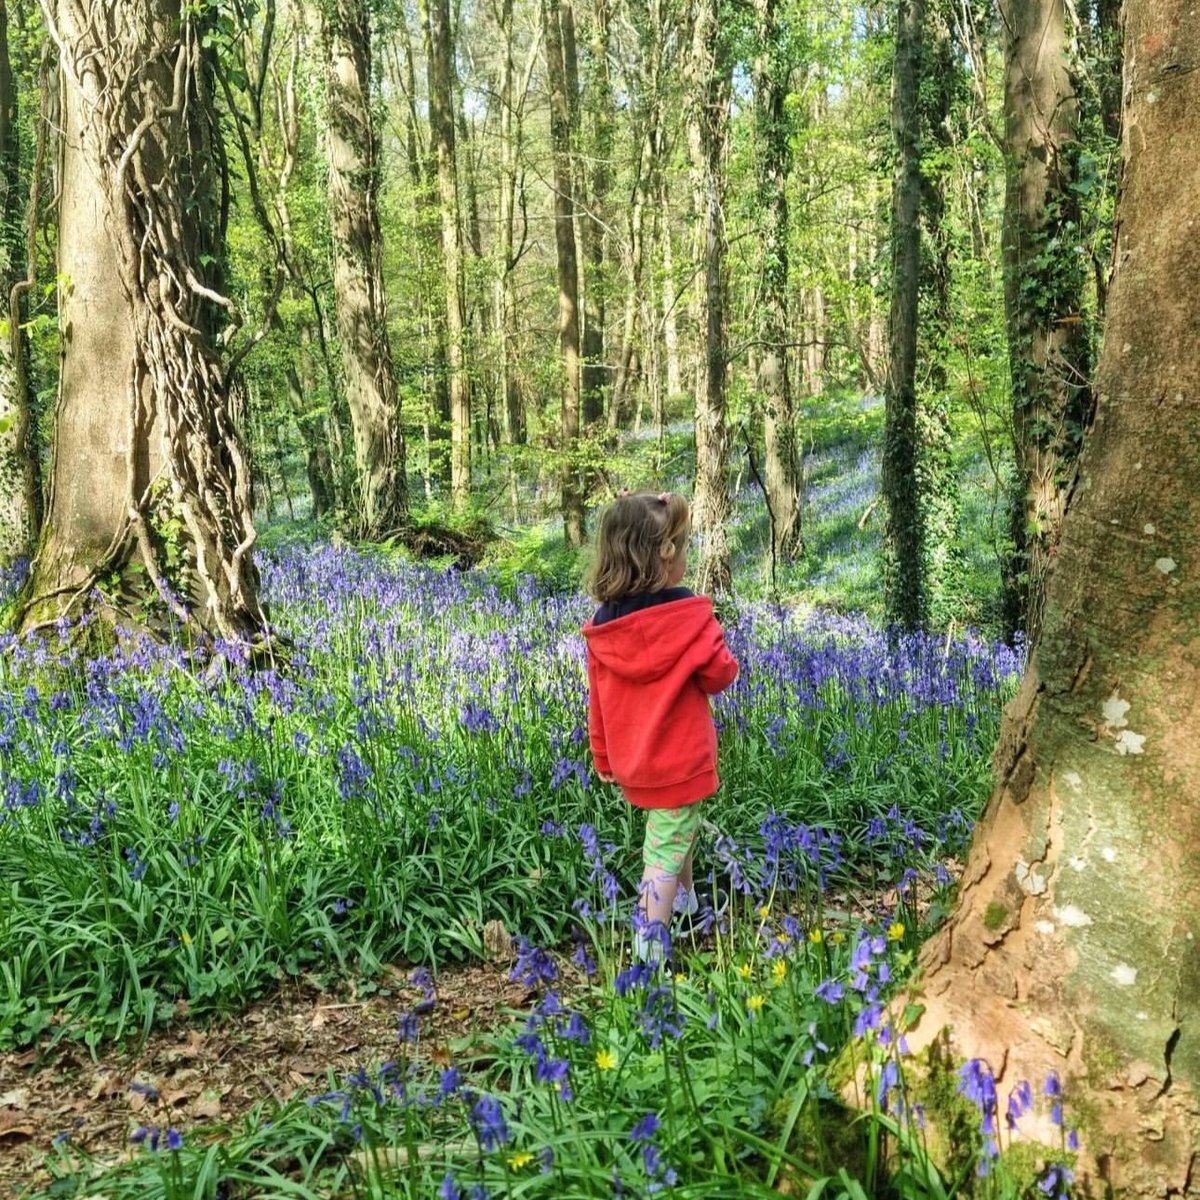 Embark on a journey through a sea of blue as nature adorns its canvas with the vibrant hues of bluebells. 🌿💙

📍 Loughgall Country Park
📸 Credit to @tina_c_photos for this beautiful shot!
_________________
Tag us in your captures using #VisitArmagh

#DiscoverNI #TourismIreland